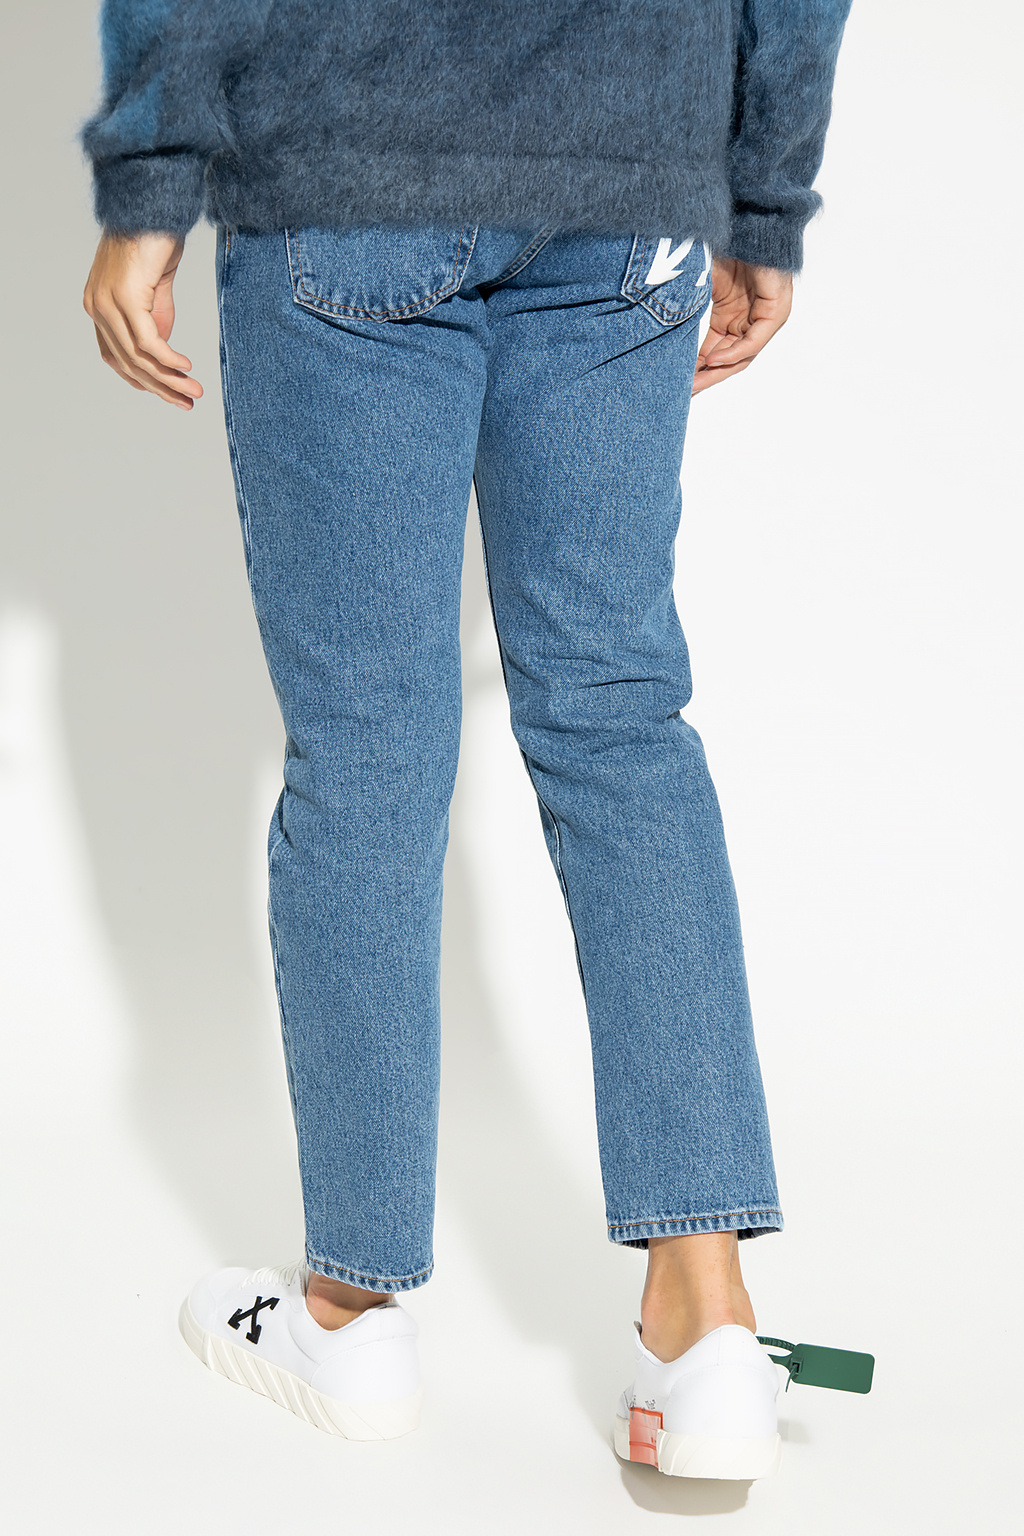 Off-White Jack Wills Cornwall Tapered Girlfriend Jeans